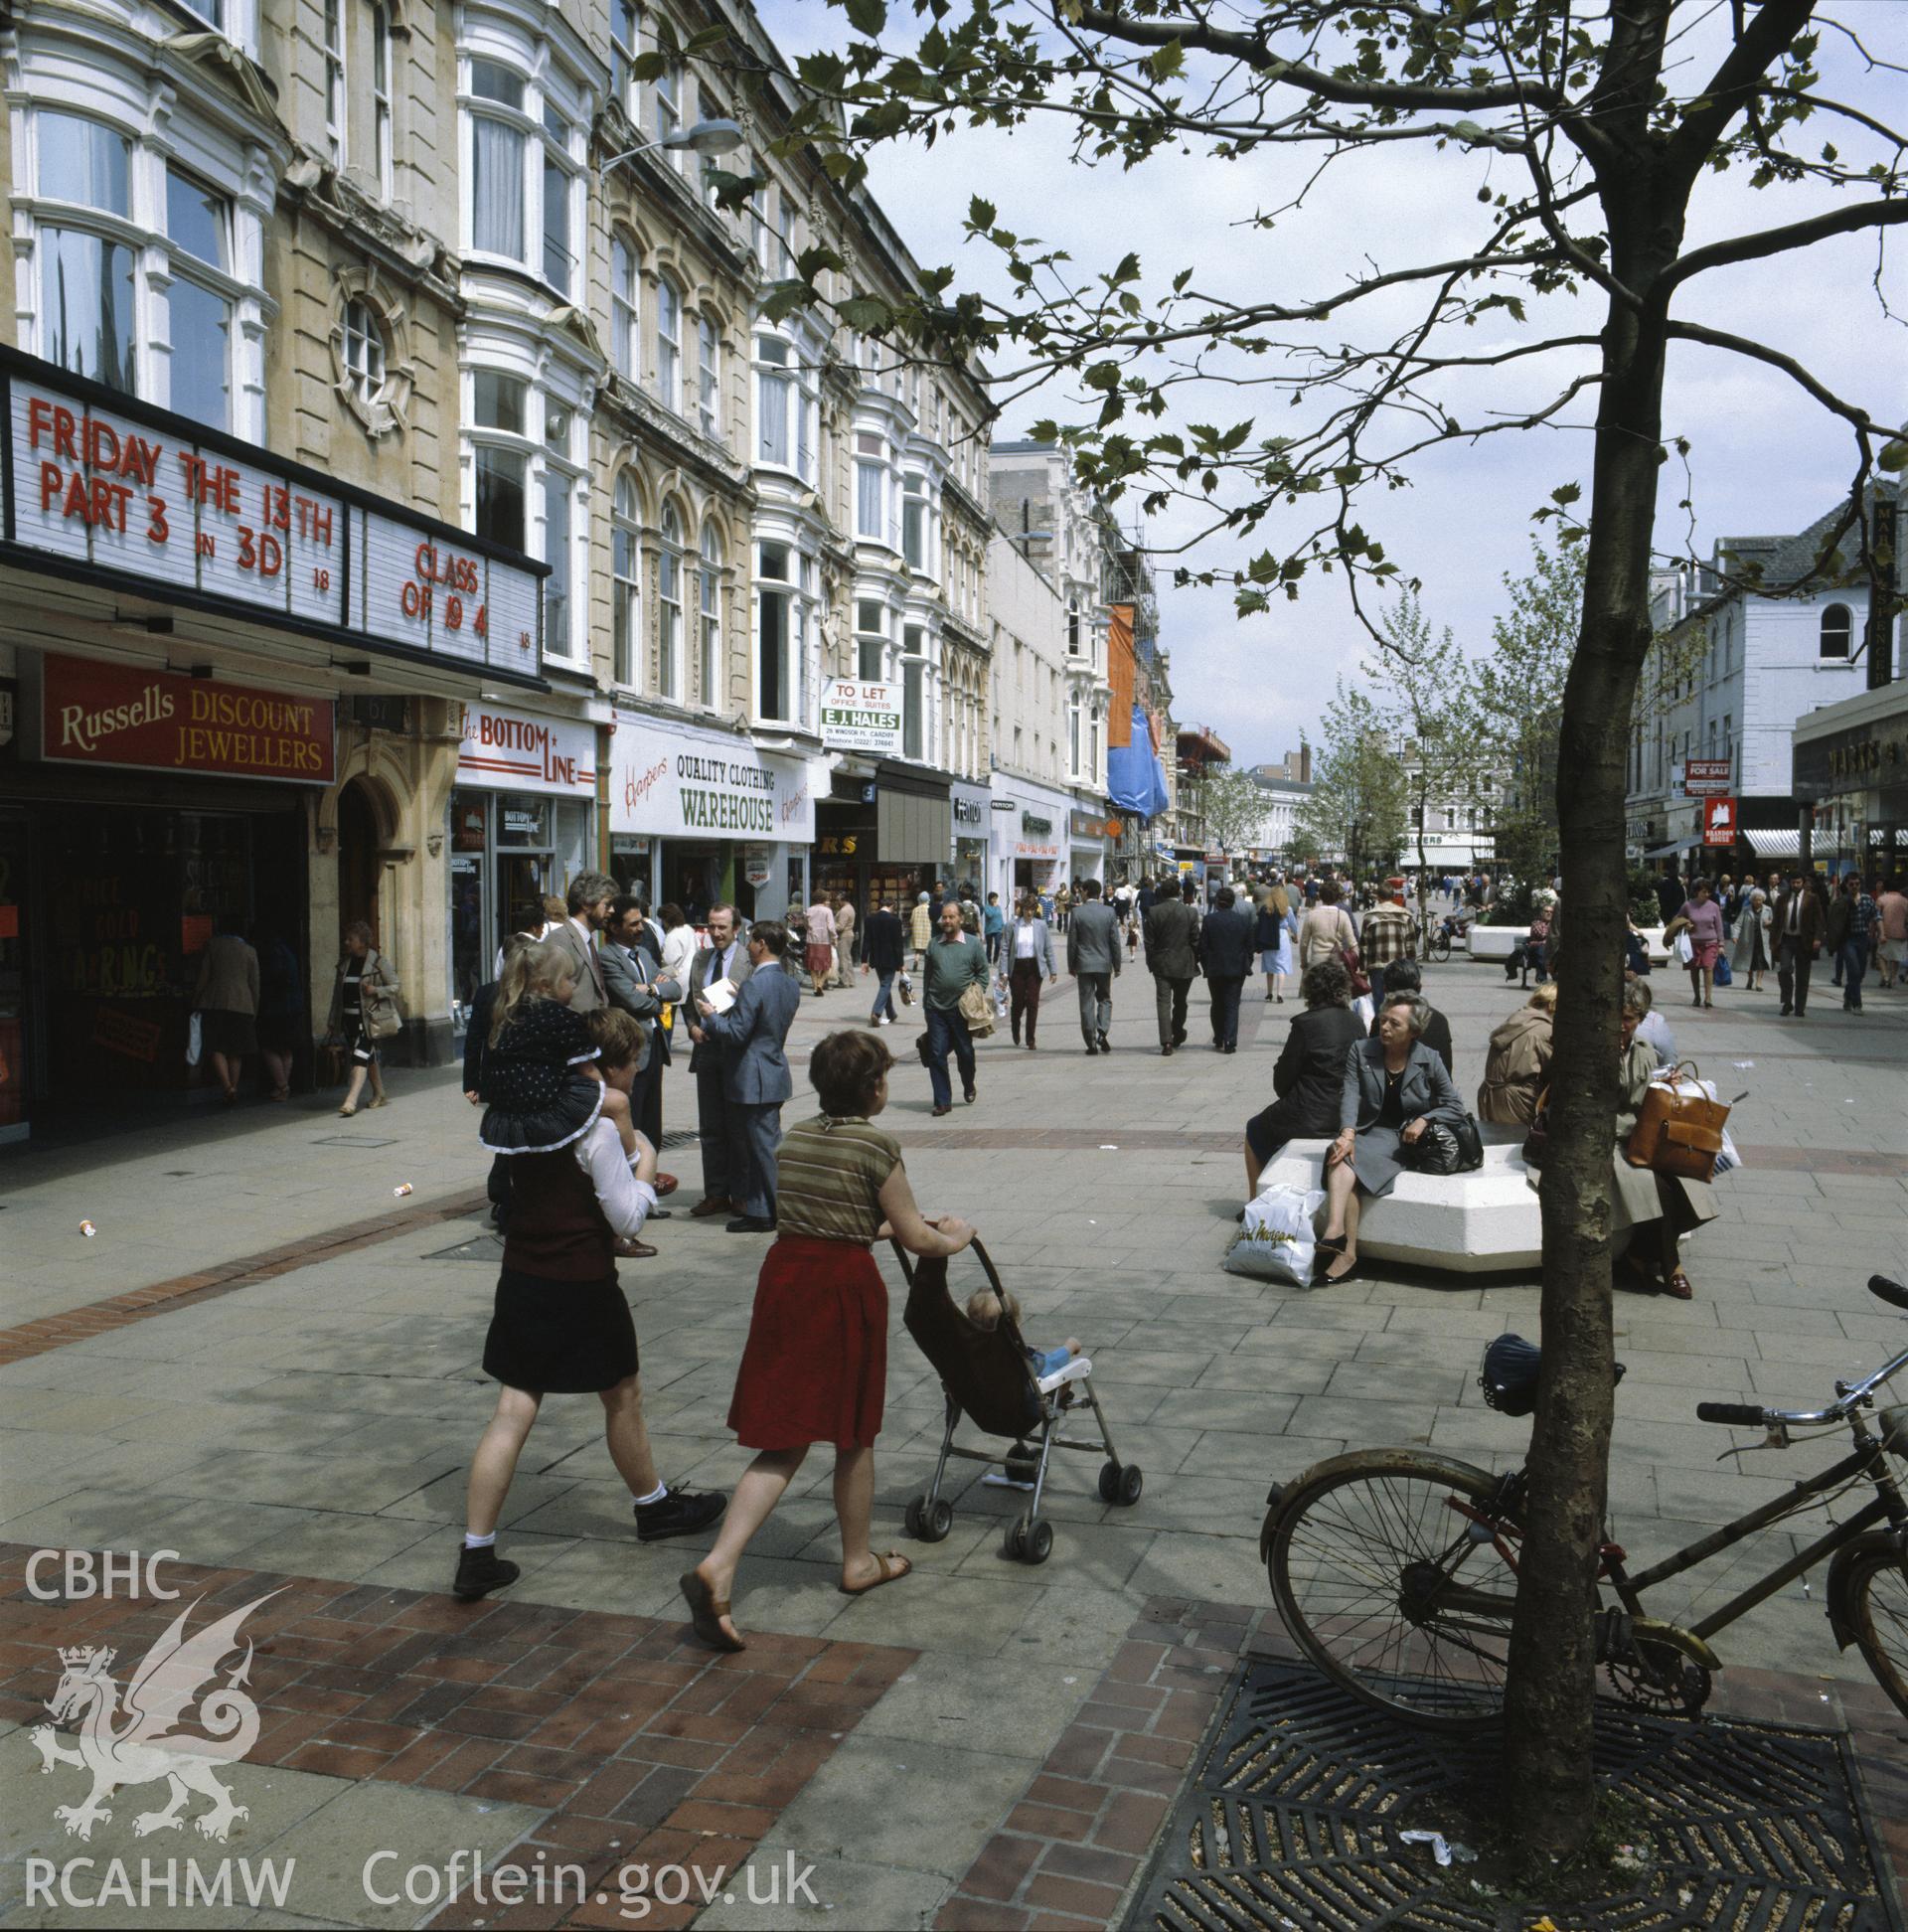 1 colour transparency showingn street scene in central Cardiff with shoppers; collated by the former Central Office of Information.